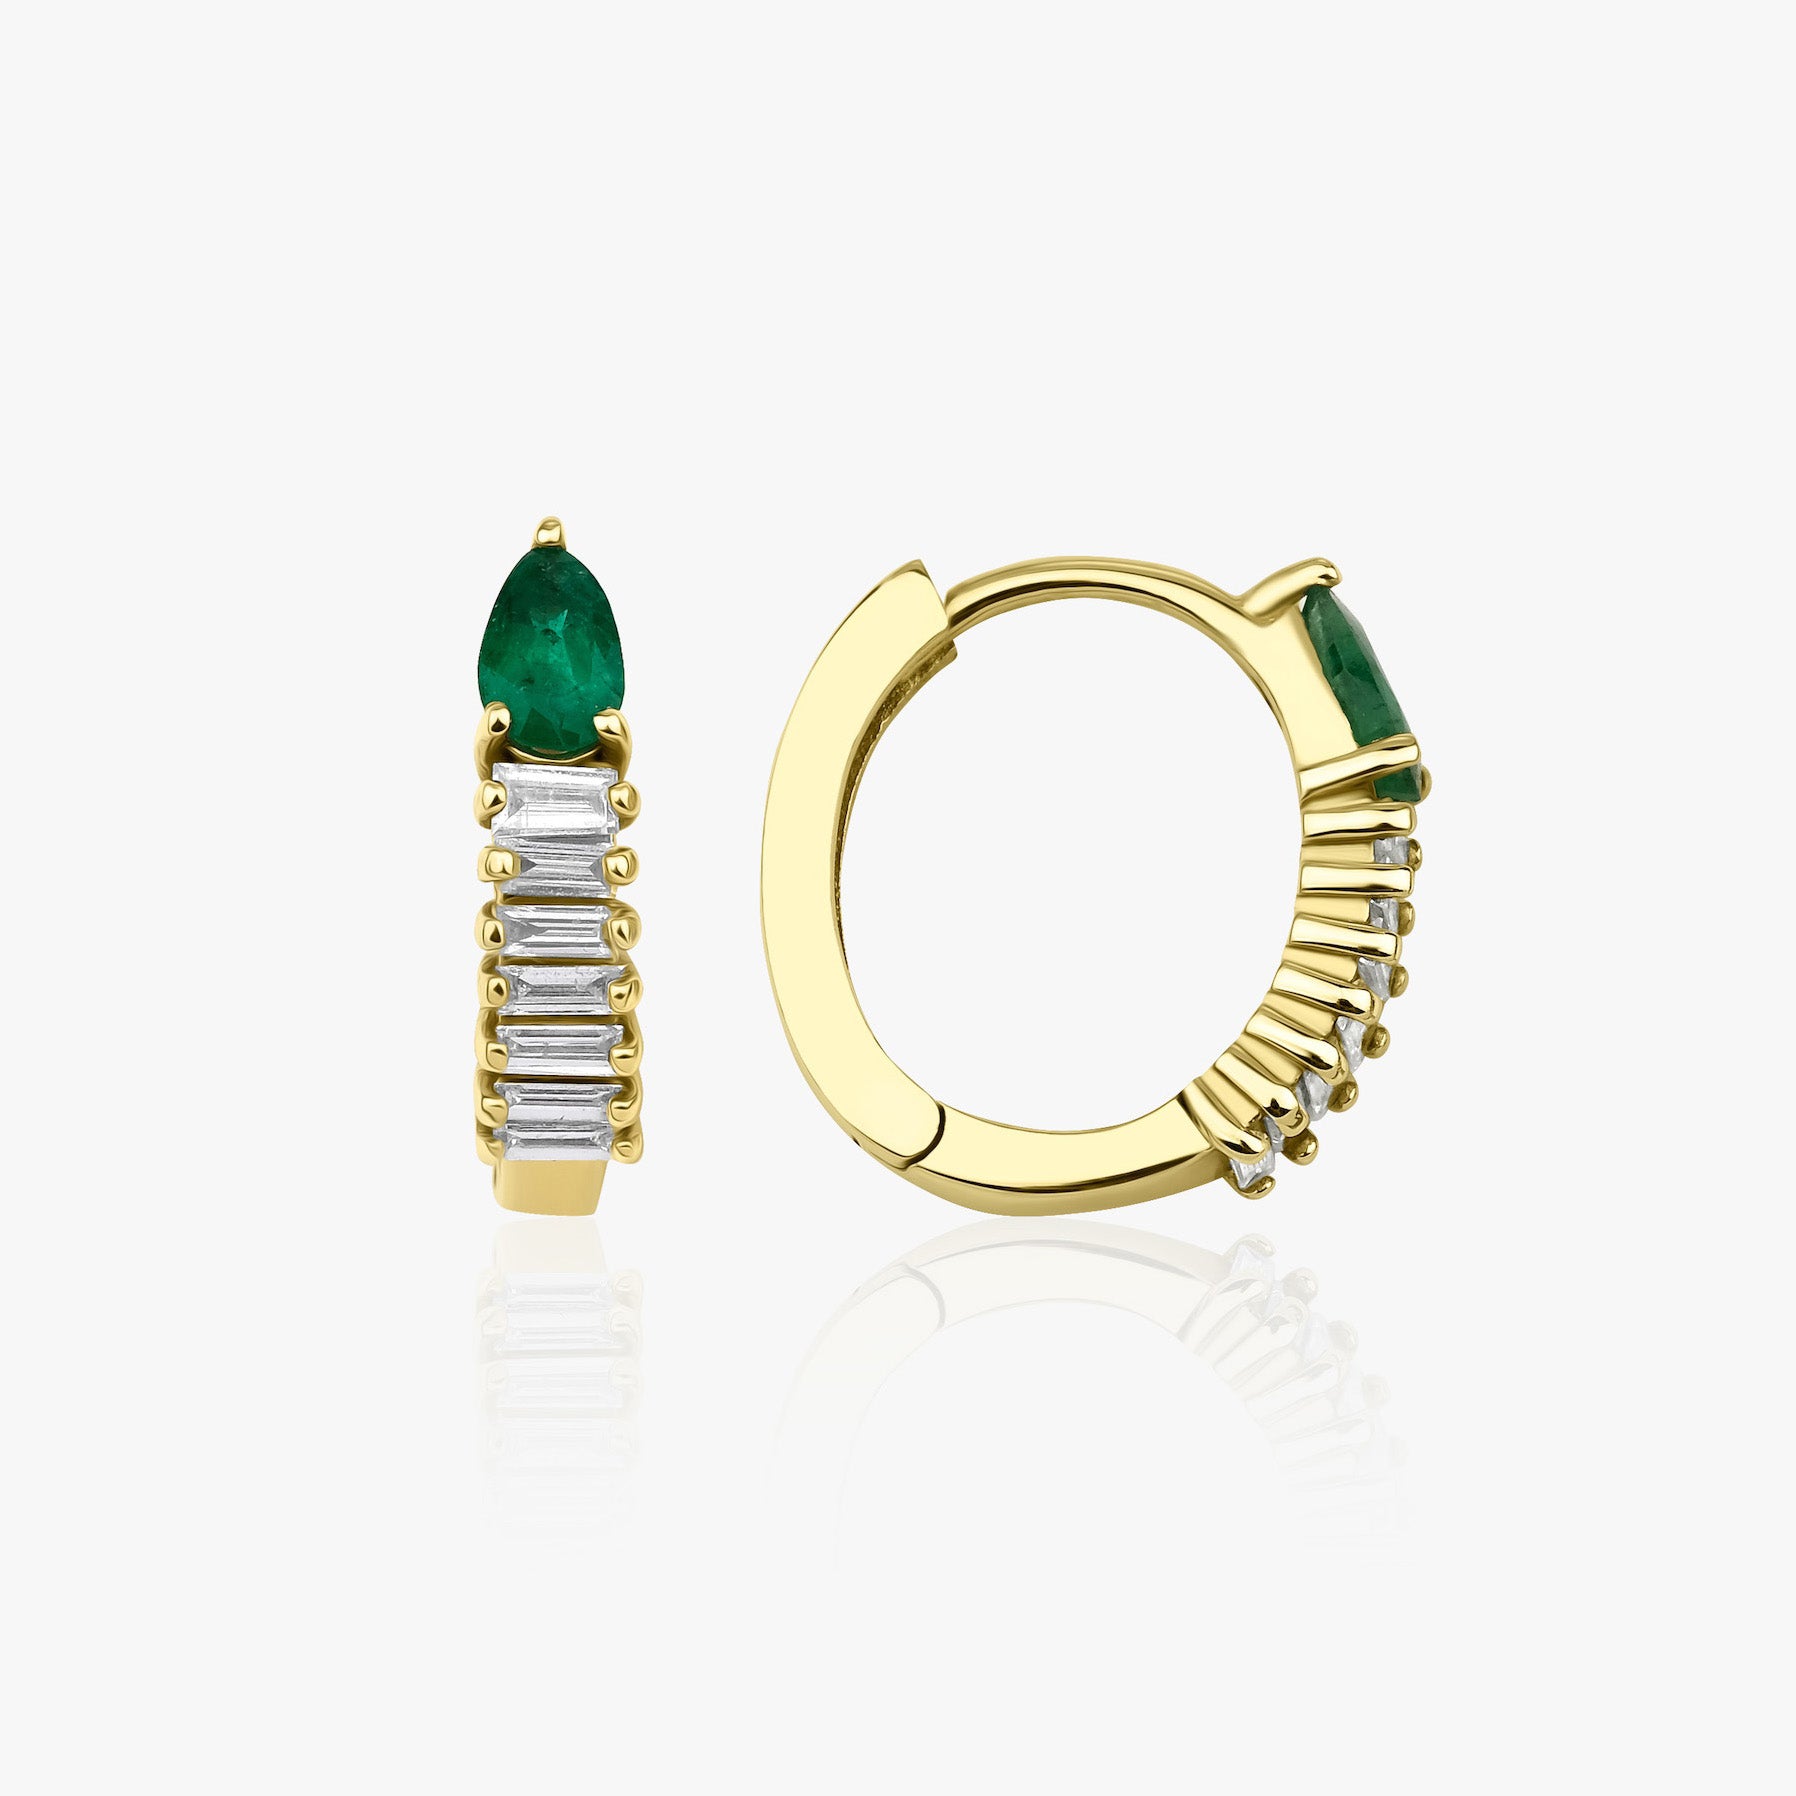 Emerald Earrings With Baguette Cut Diamonds Available in 14K and 18K Gold